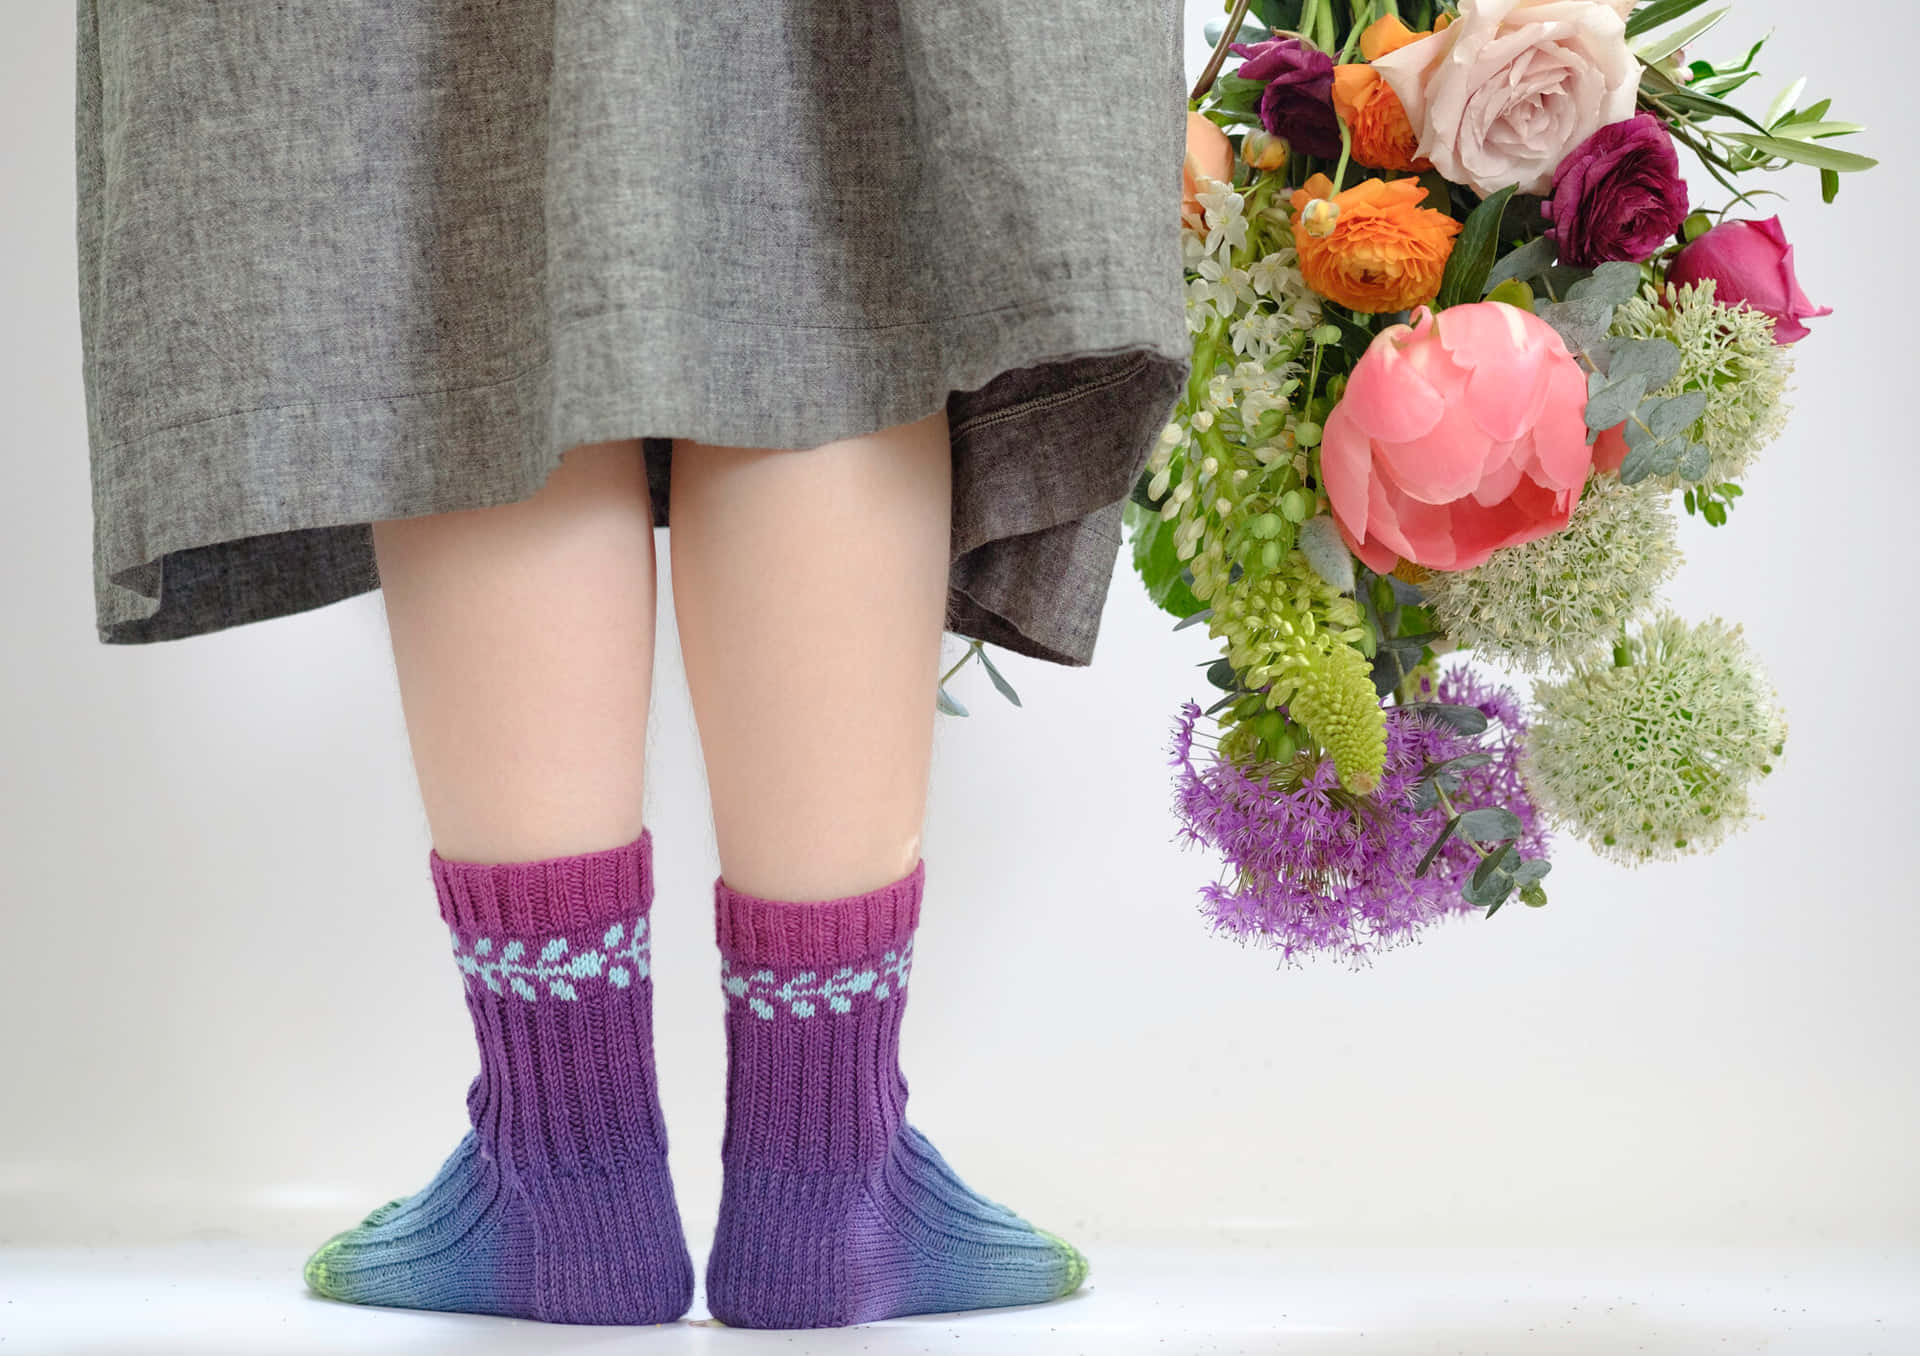 Look noth further for stylish, affordable purple socks Wallpaper